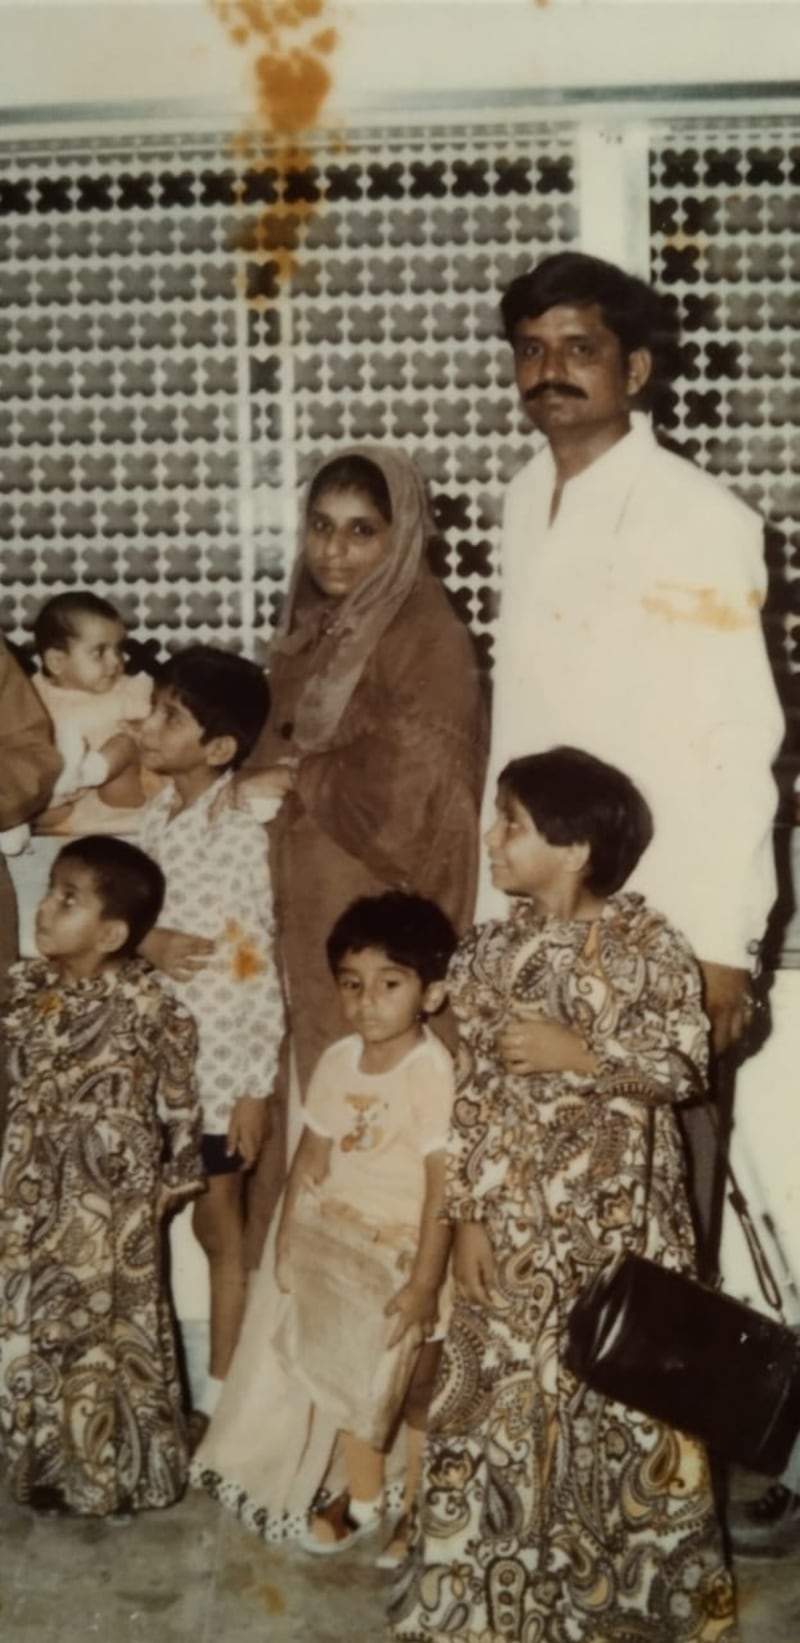 The Siraj family at Mumbai airport in 1974 after they had moved to live in Dubai. Photo: Siraj family